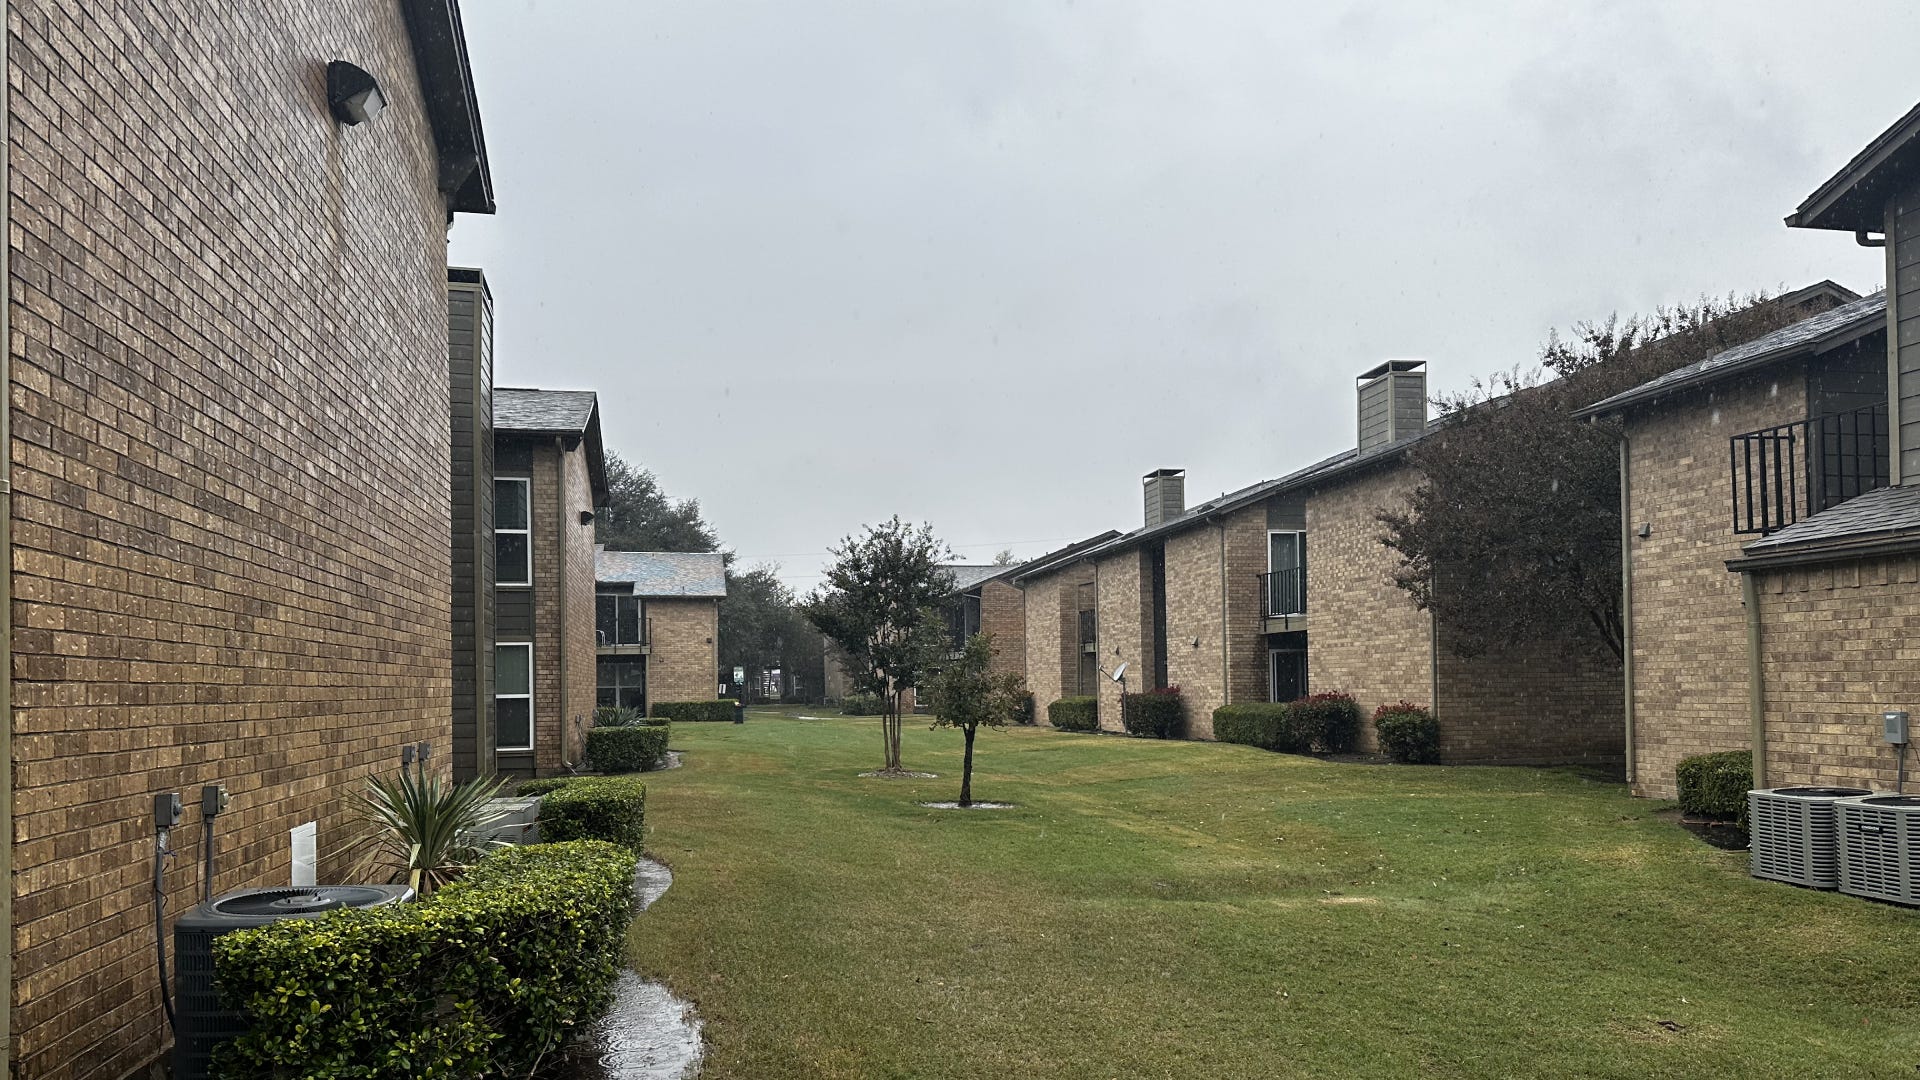 Apartments on either side of greenspace with two trees in the middle